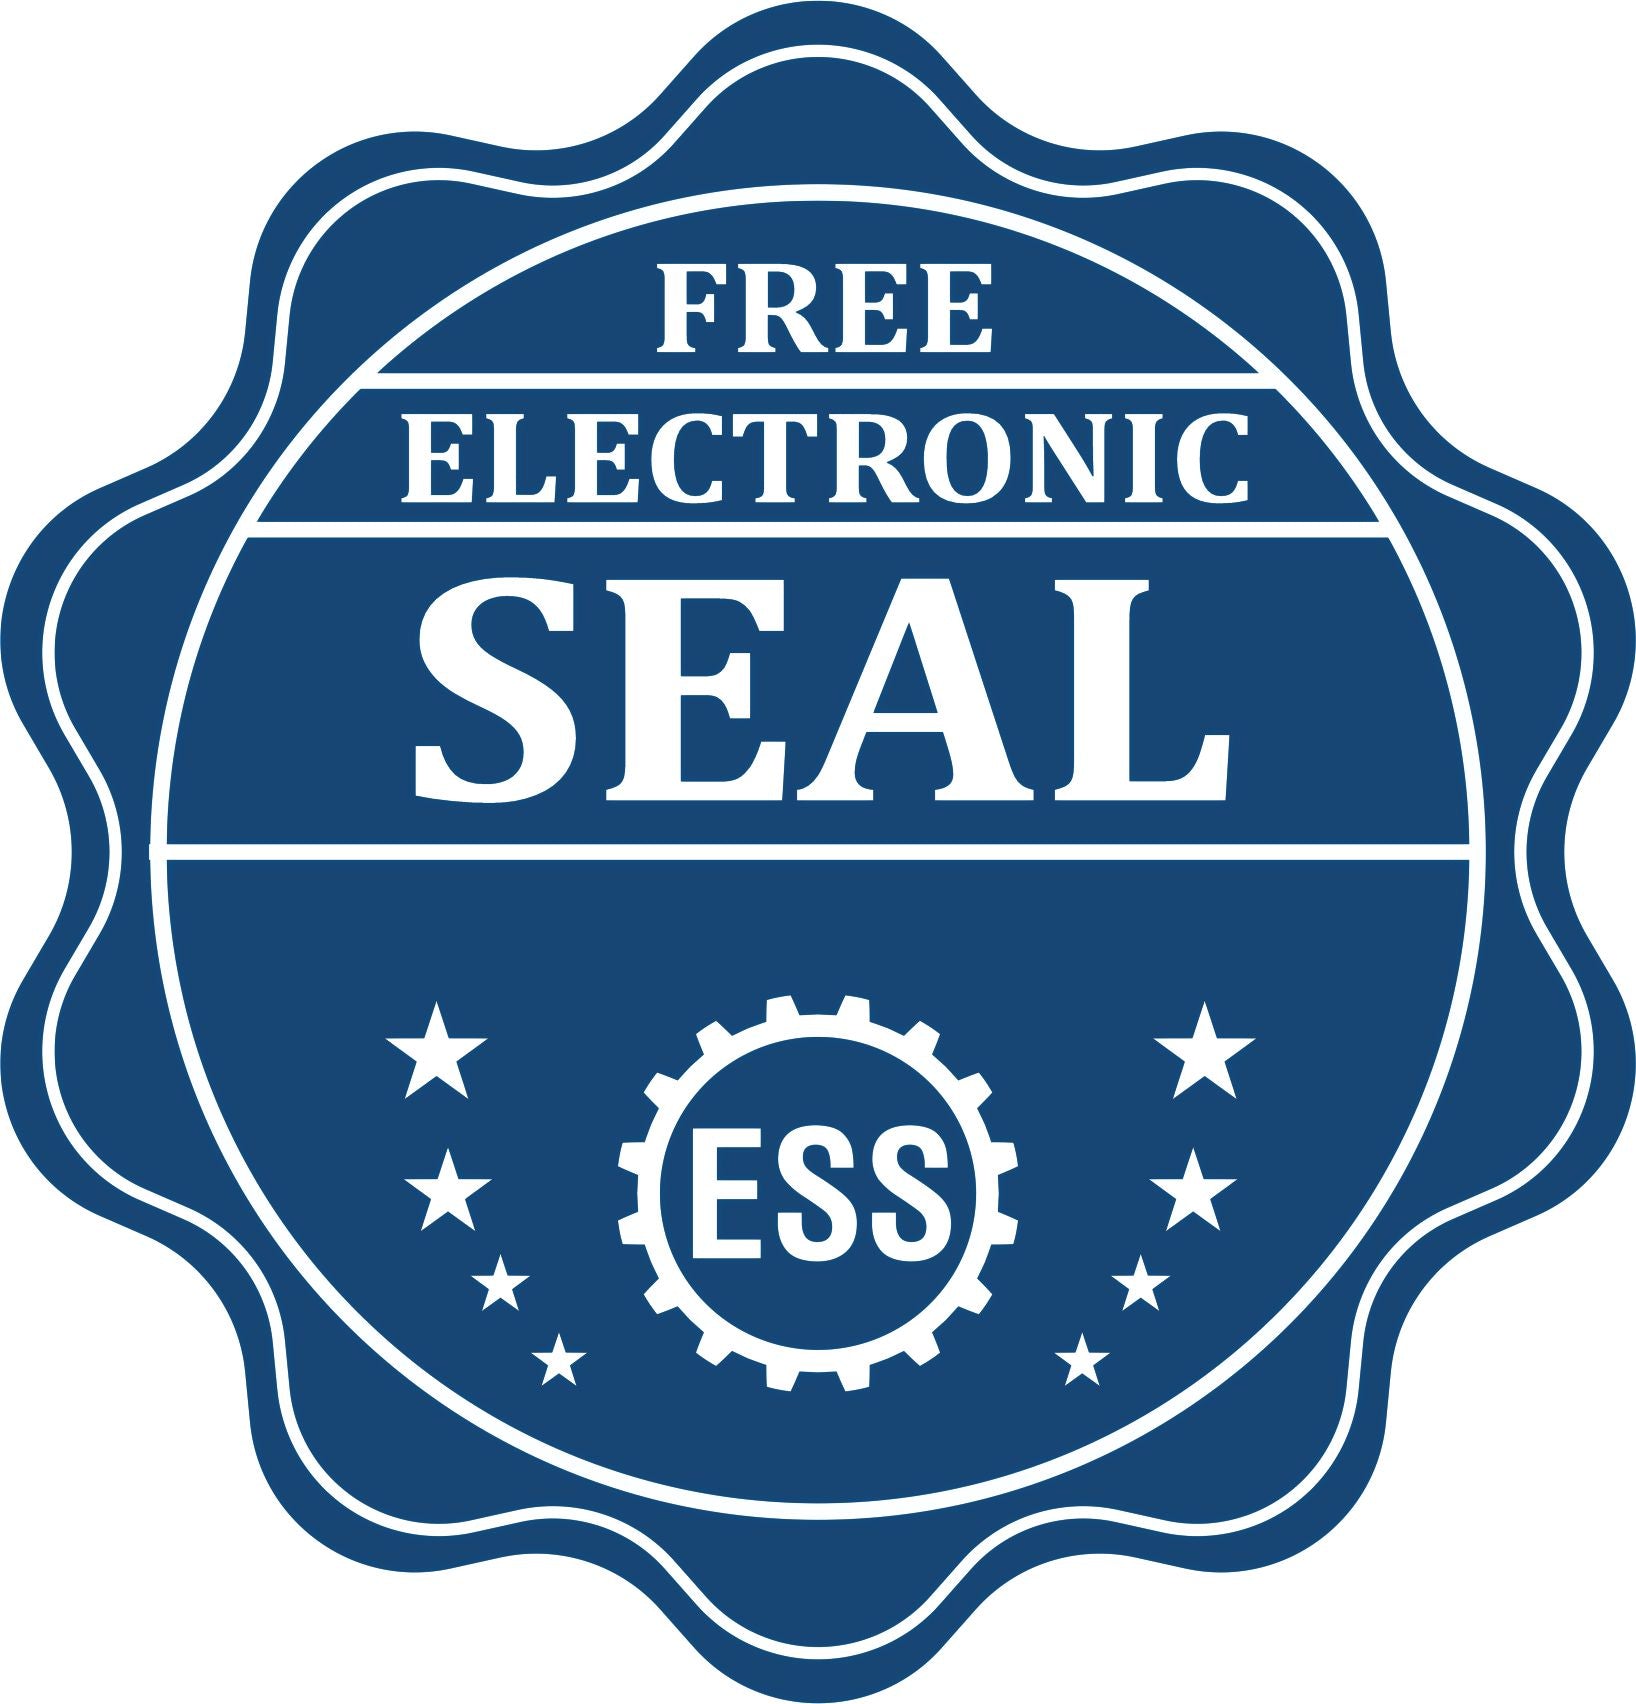 A badge showing a free electronic seal for the Hybrid Arizona Land Surveyor Seal with stars and the ESS gear on the emblem.